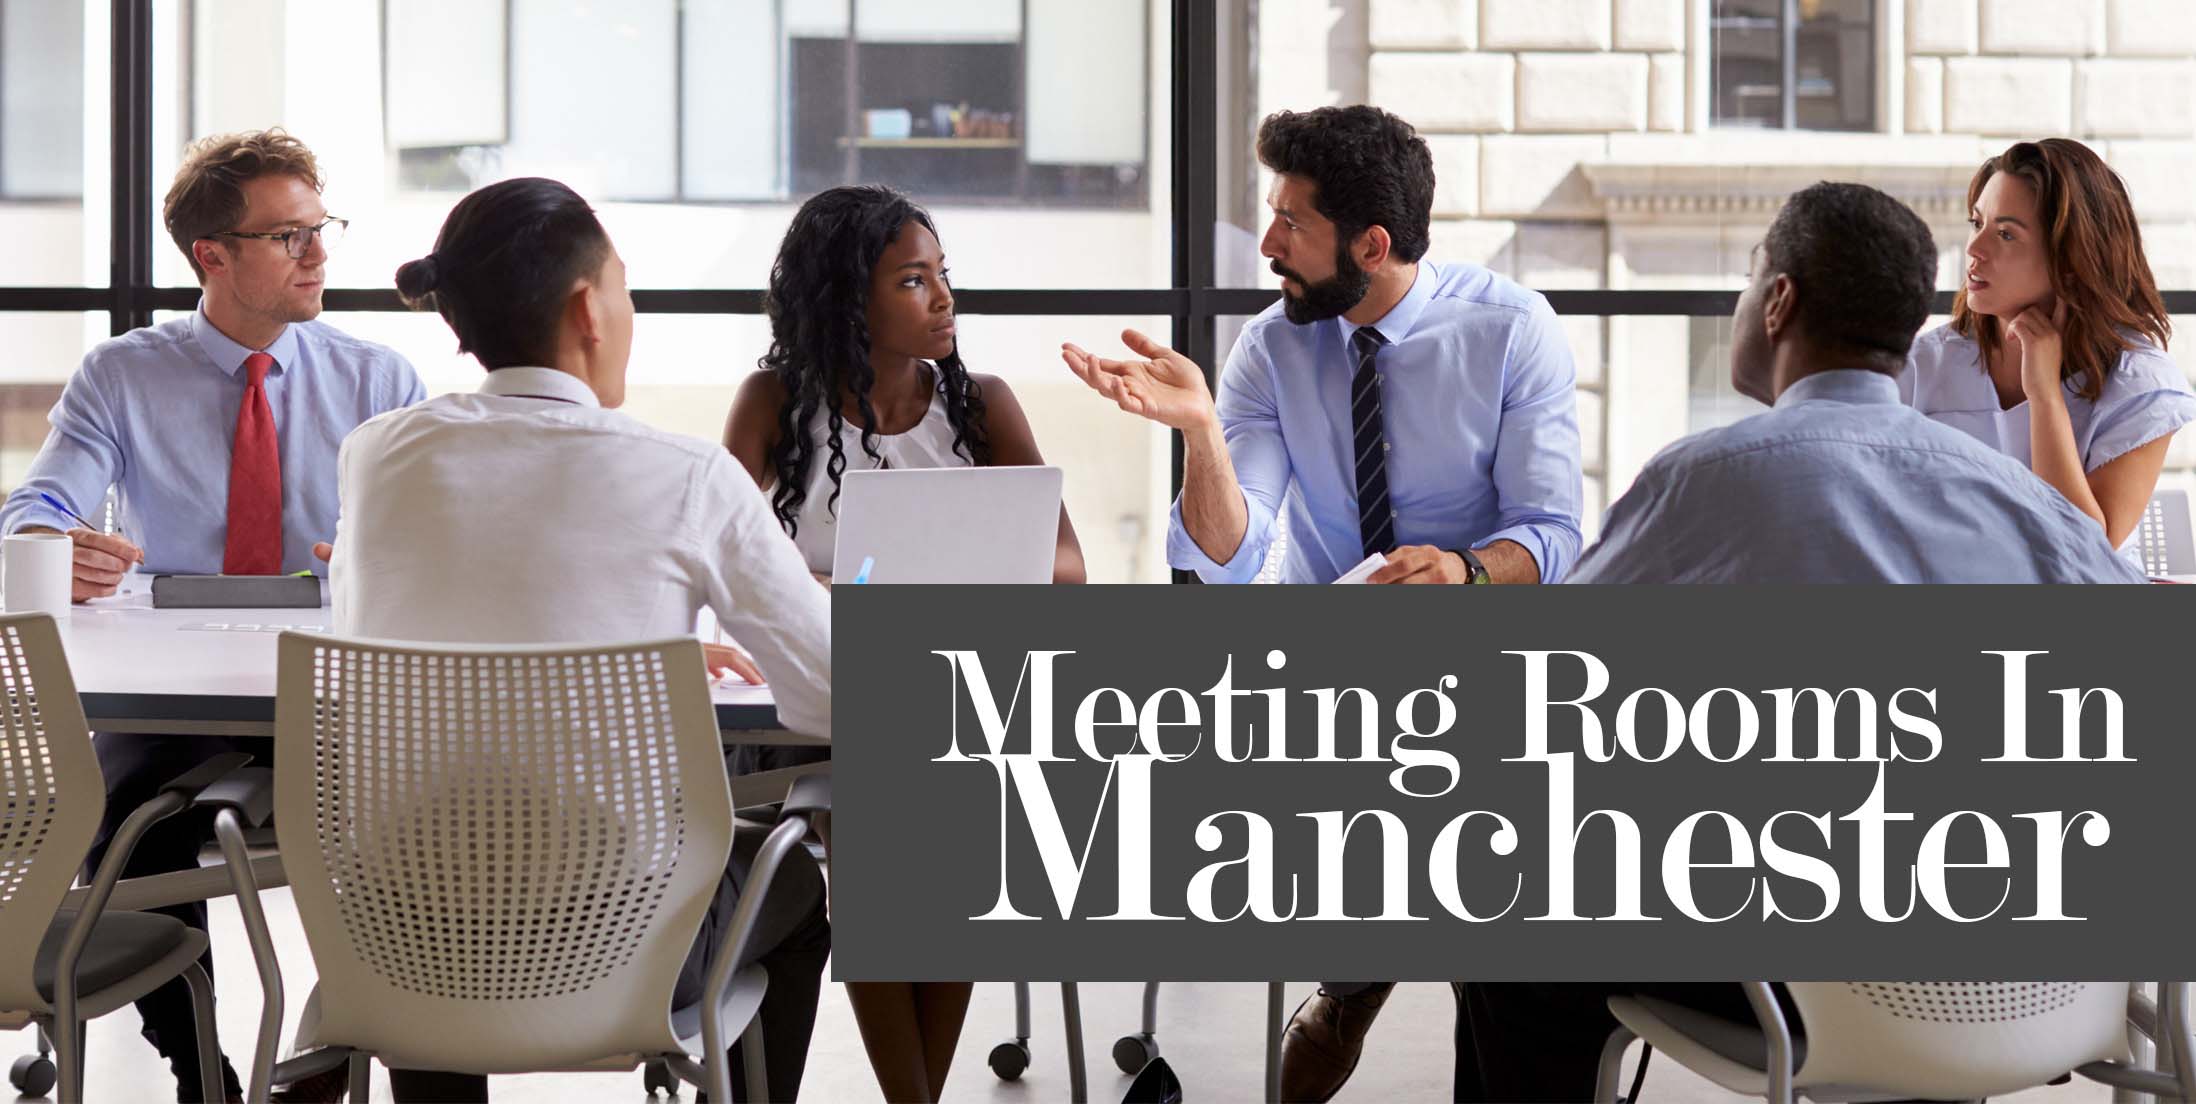 Meeting Rooms in Manchester